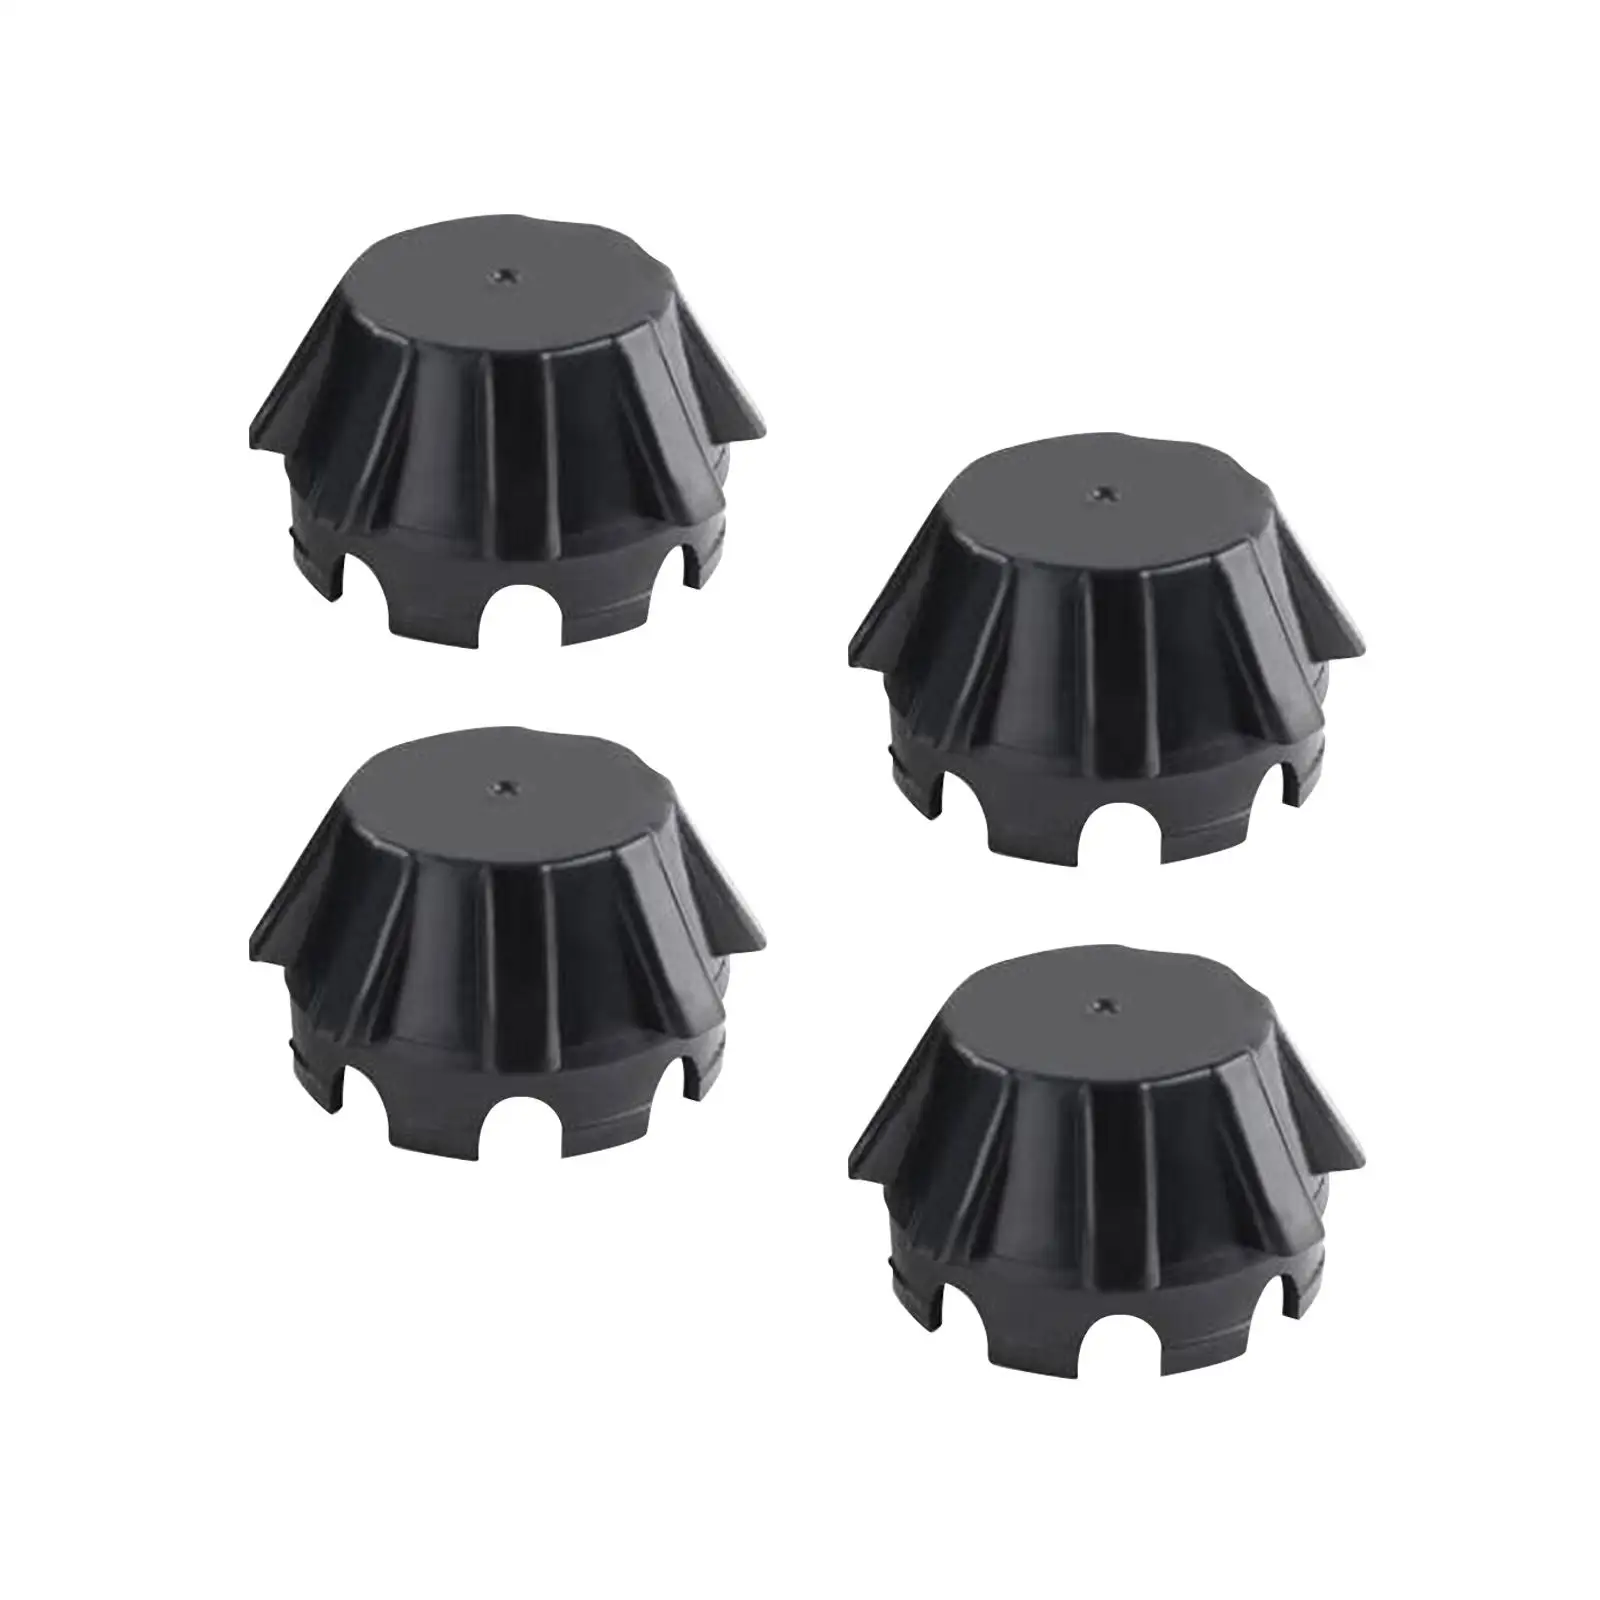 4x Tire Wheel Hub Caps 11065-1341 Easy Installation Replacement Assembly Accessory for Kawasaki Teryx Krx 1000 2020-2022